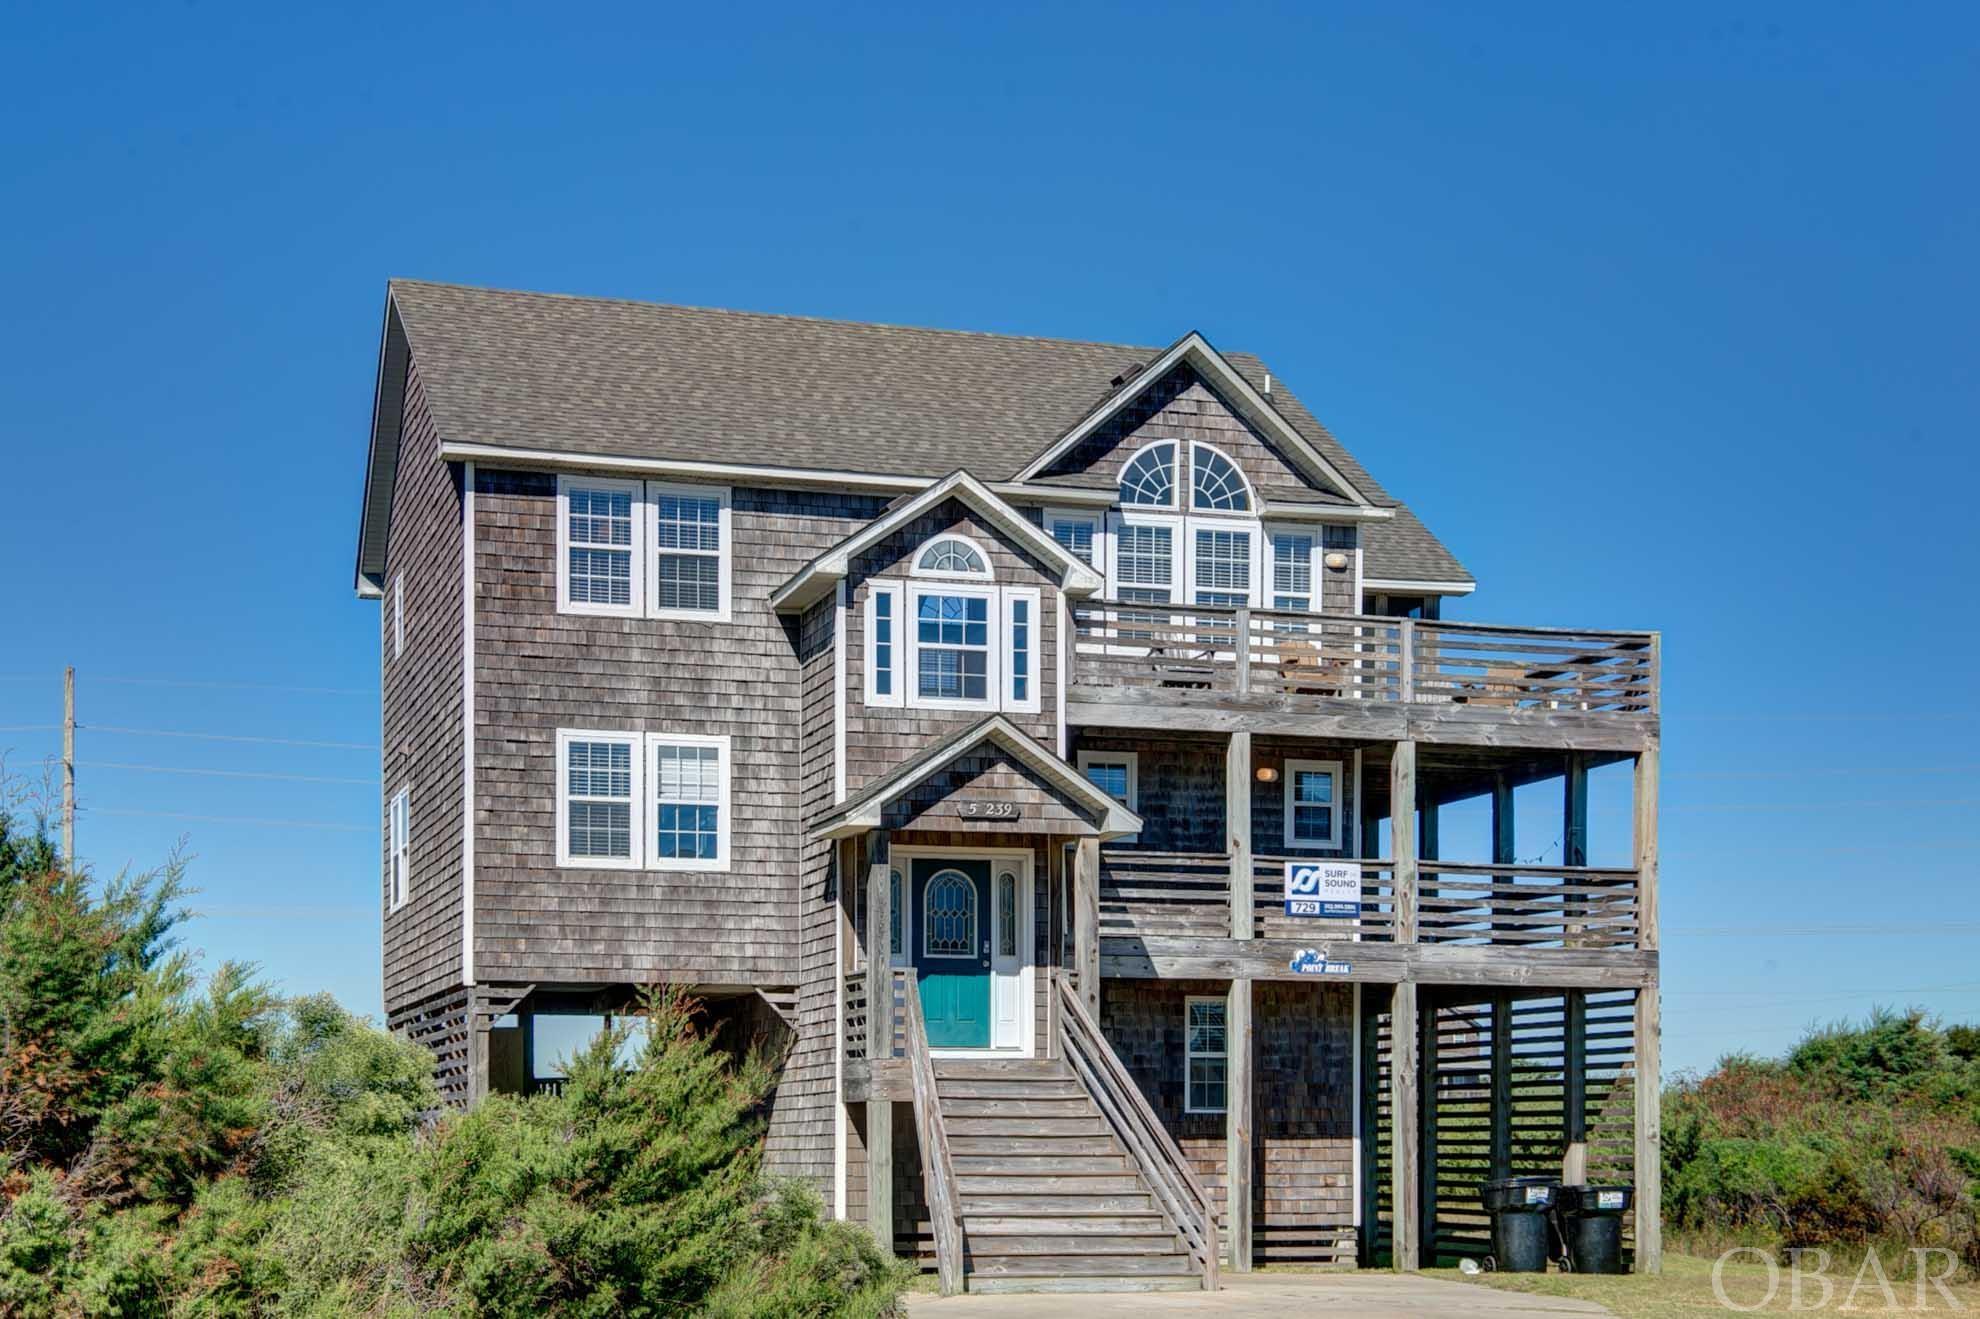 Discover "Point Break," a semi-oceanfront gem in Summerplace Subdivision, Hatteras. This spacious 5-bedroom, 4-bathroom retreat offers a private pool, hot tub, game room, fireplace, and scenic wraparound decks with sound and ocean views. With an impressive 2023 owner income of 72k+ and pre-bookings for 2024, "Point Break" is a guest favorite. Plus, it's just steps from one of the subdivision's beach access walkways. Explore nearby marinas, museums, and top-notch restaurants on the island by bike or golf cart. Your coastal getaway awaits!